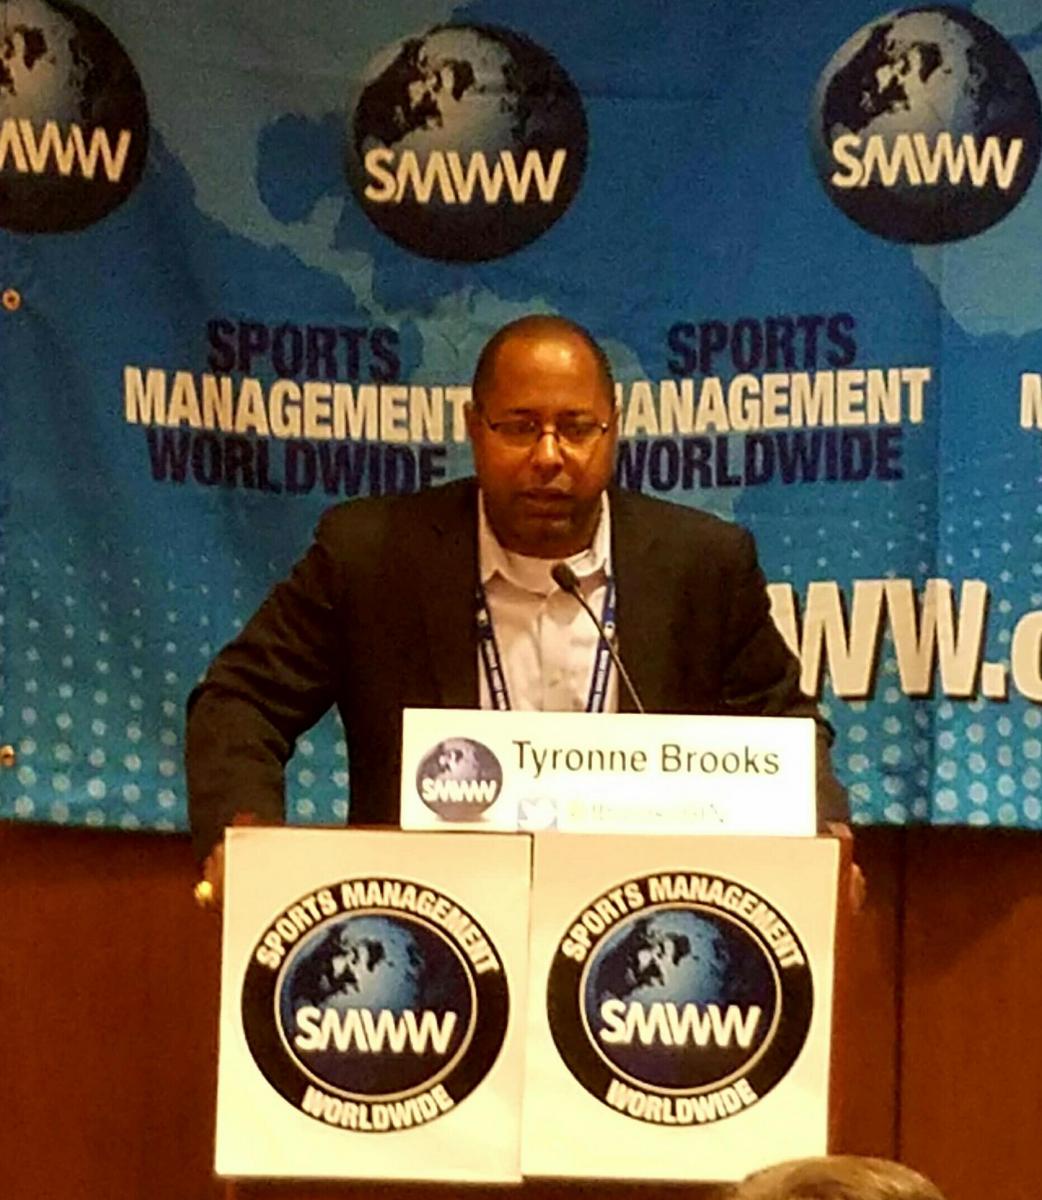 SMWW baseball career conference tyrone brooks